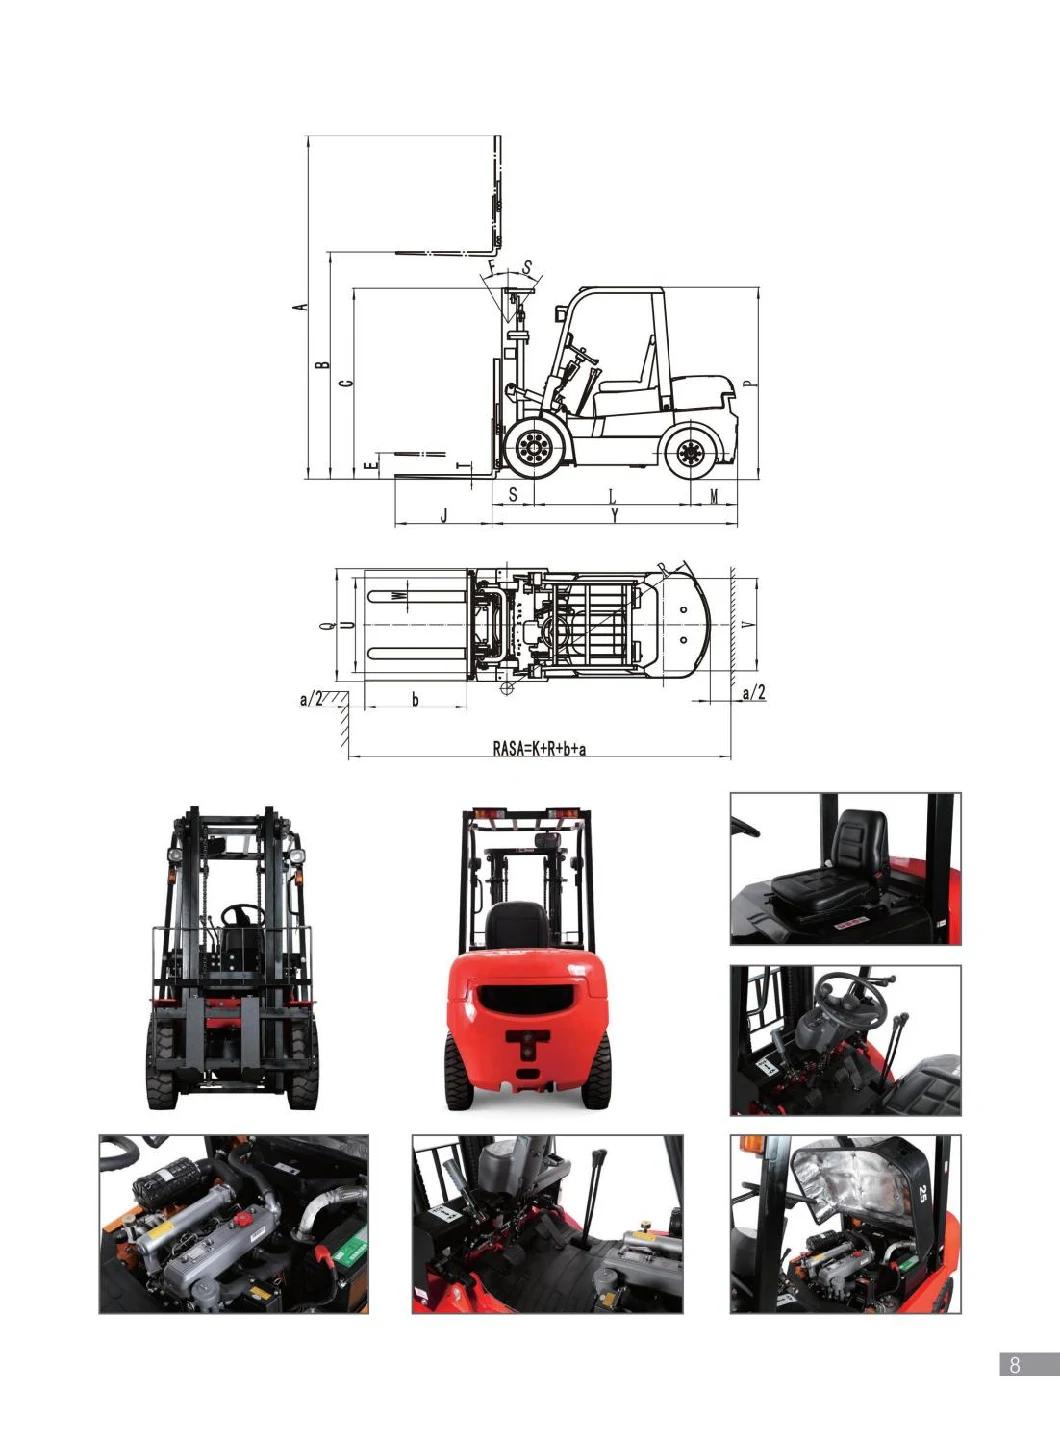 Jeakue 2ton-5 Ton 4 Wheel Counterbalance Diesel Gasoline LPG Forklift Truck with Lifting Height 6meters